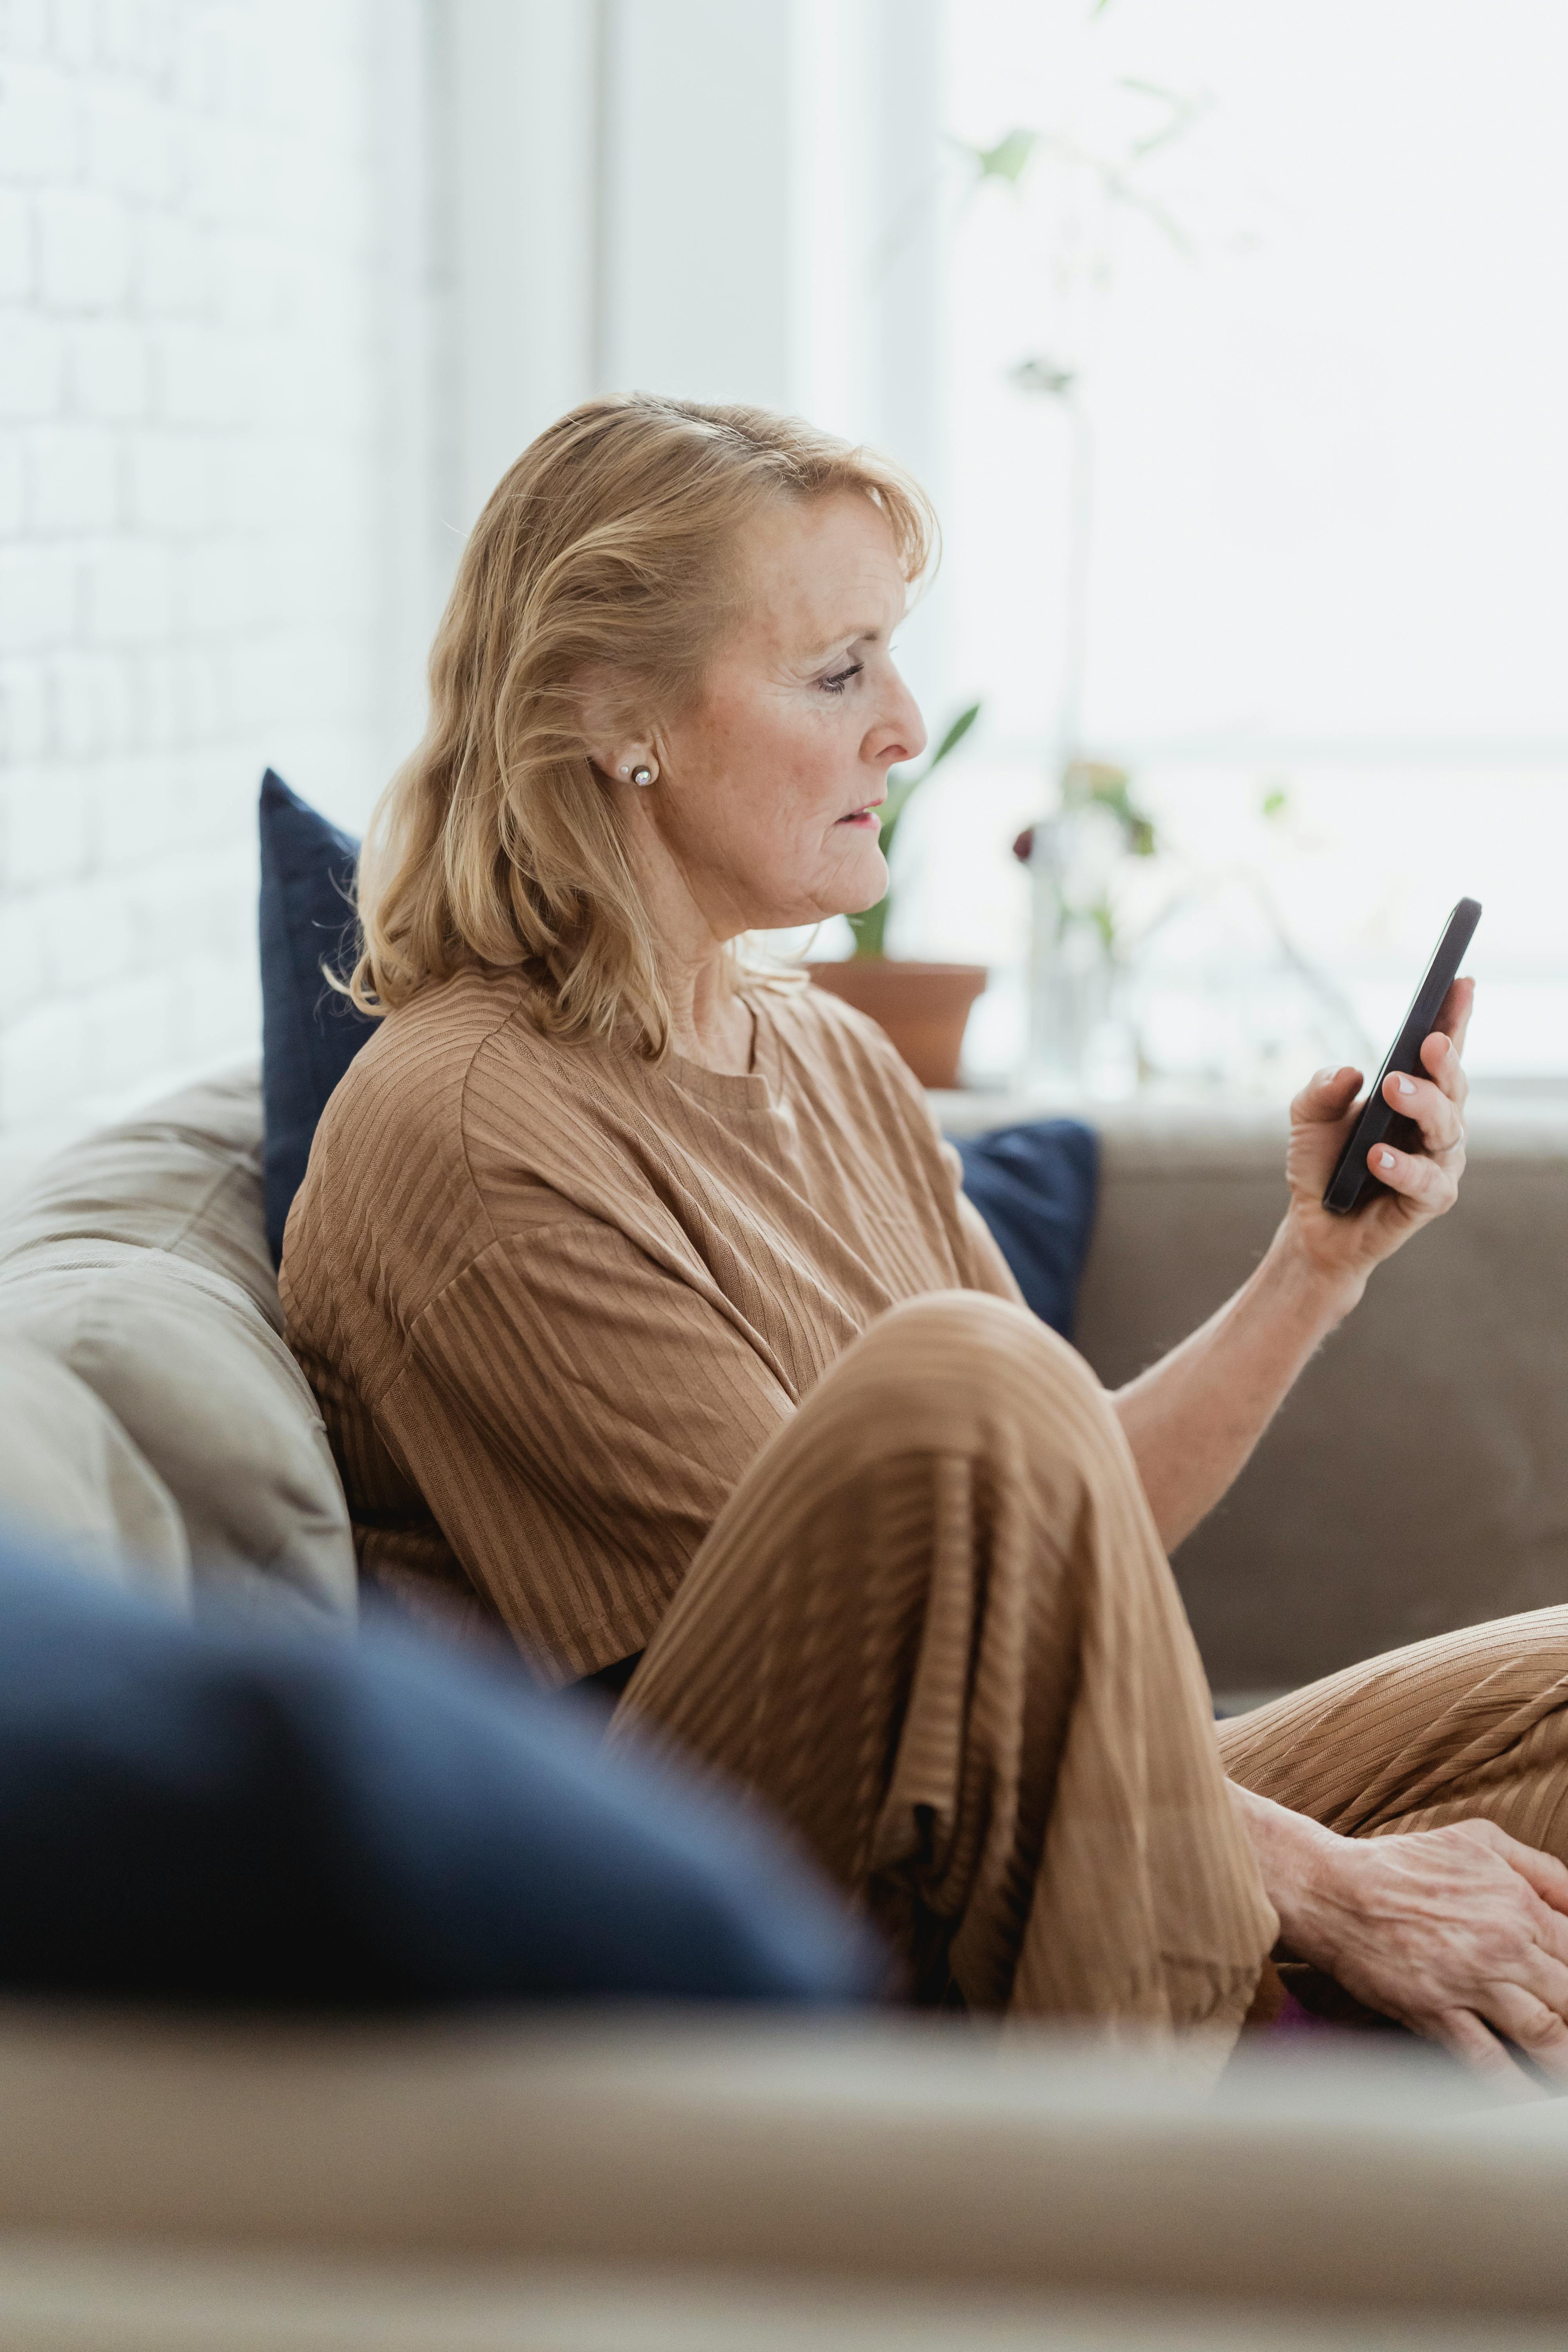 An upset woman looking at her phone | Source: Pexels